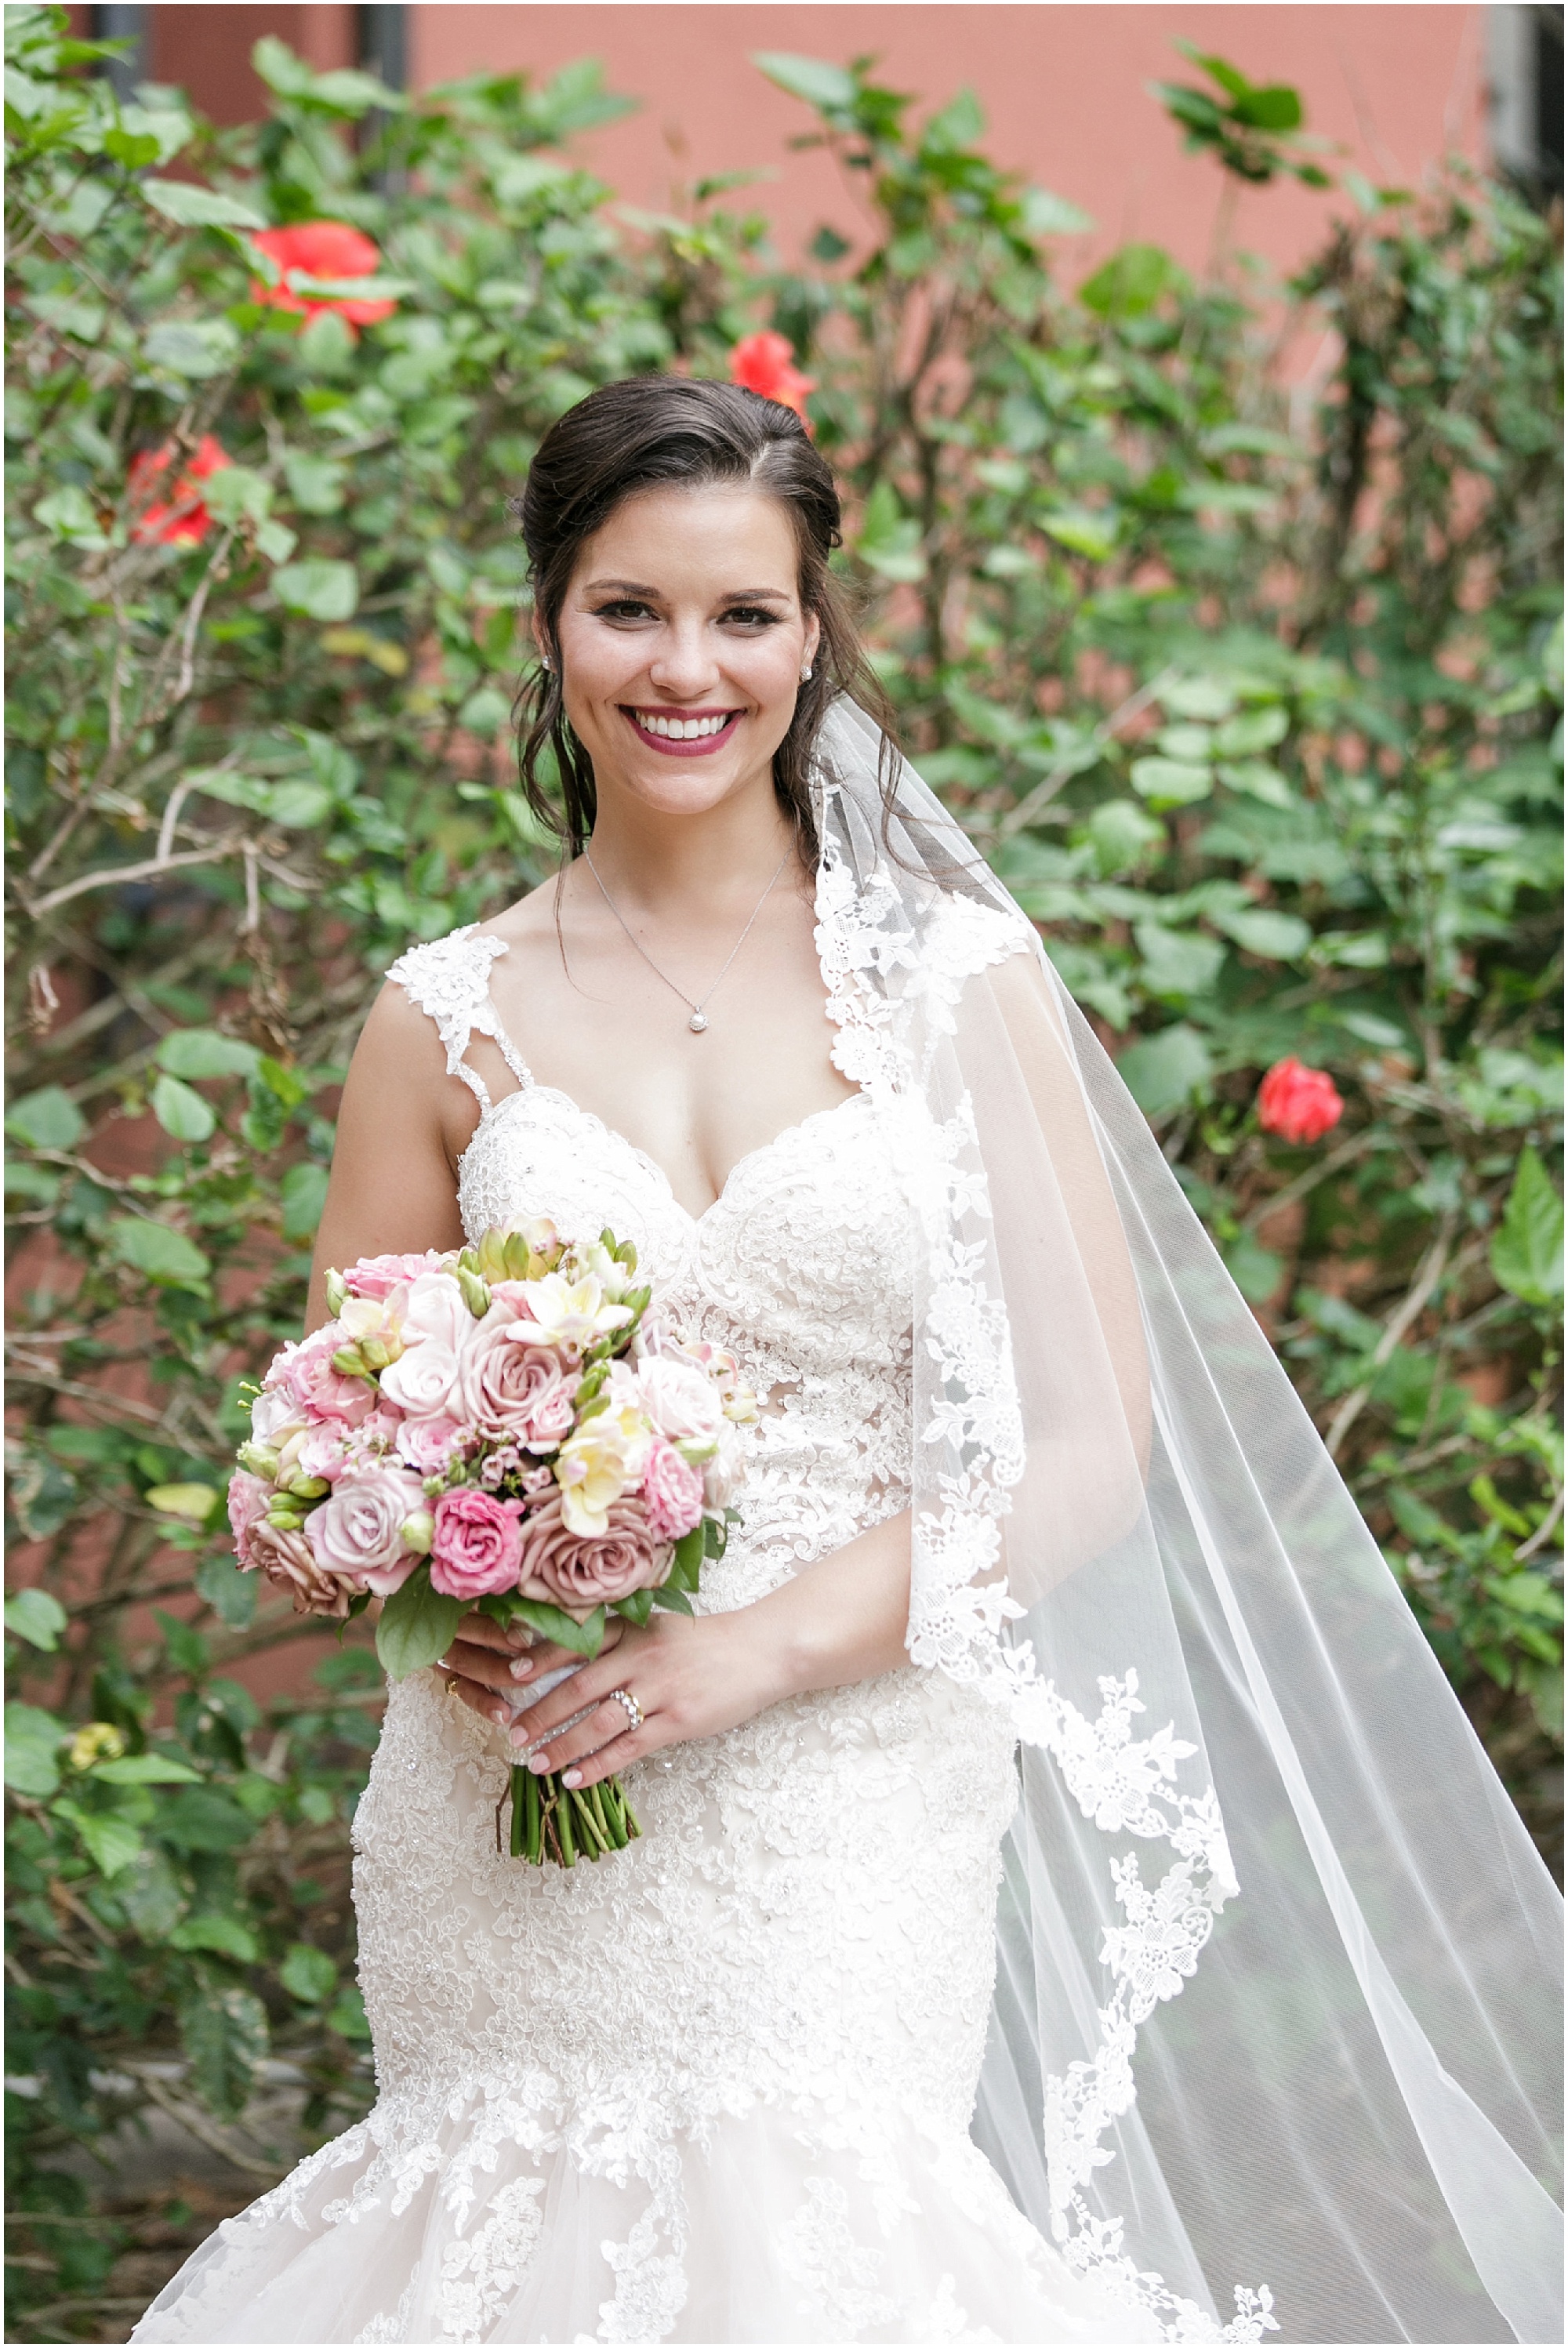 Bride smiling at the camera while she stands in front of green plants. 